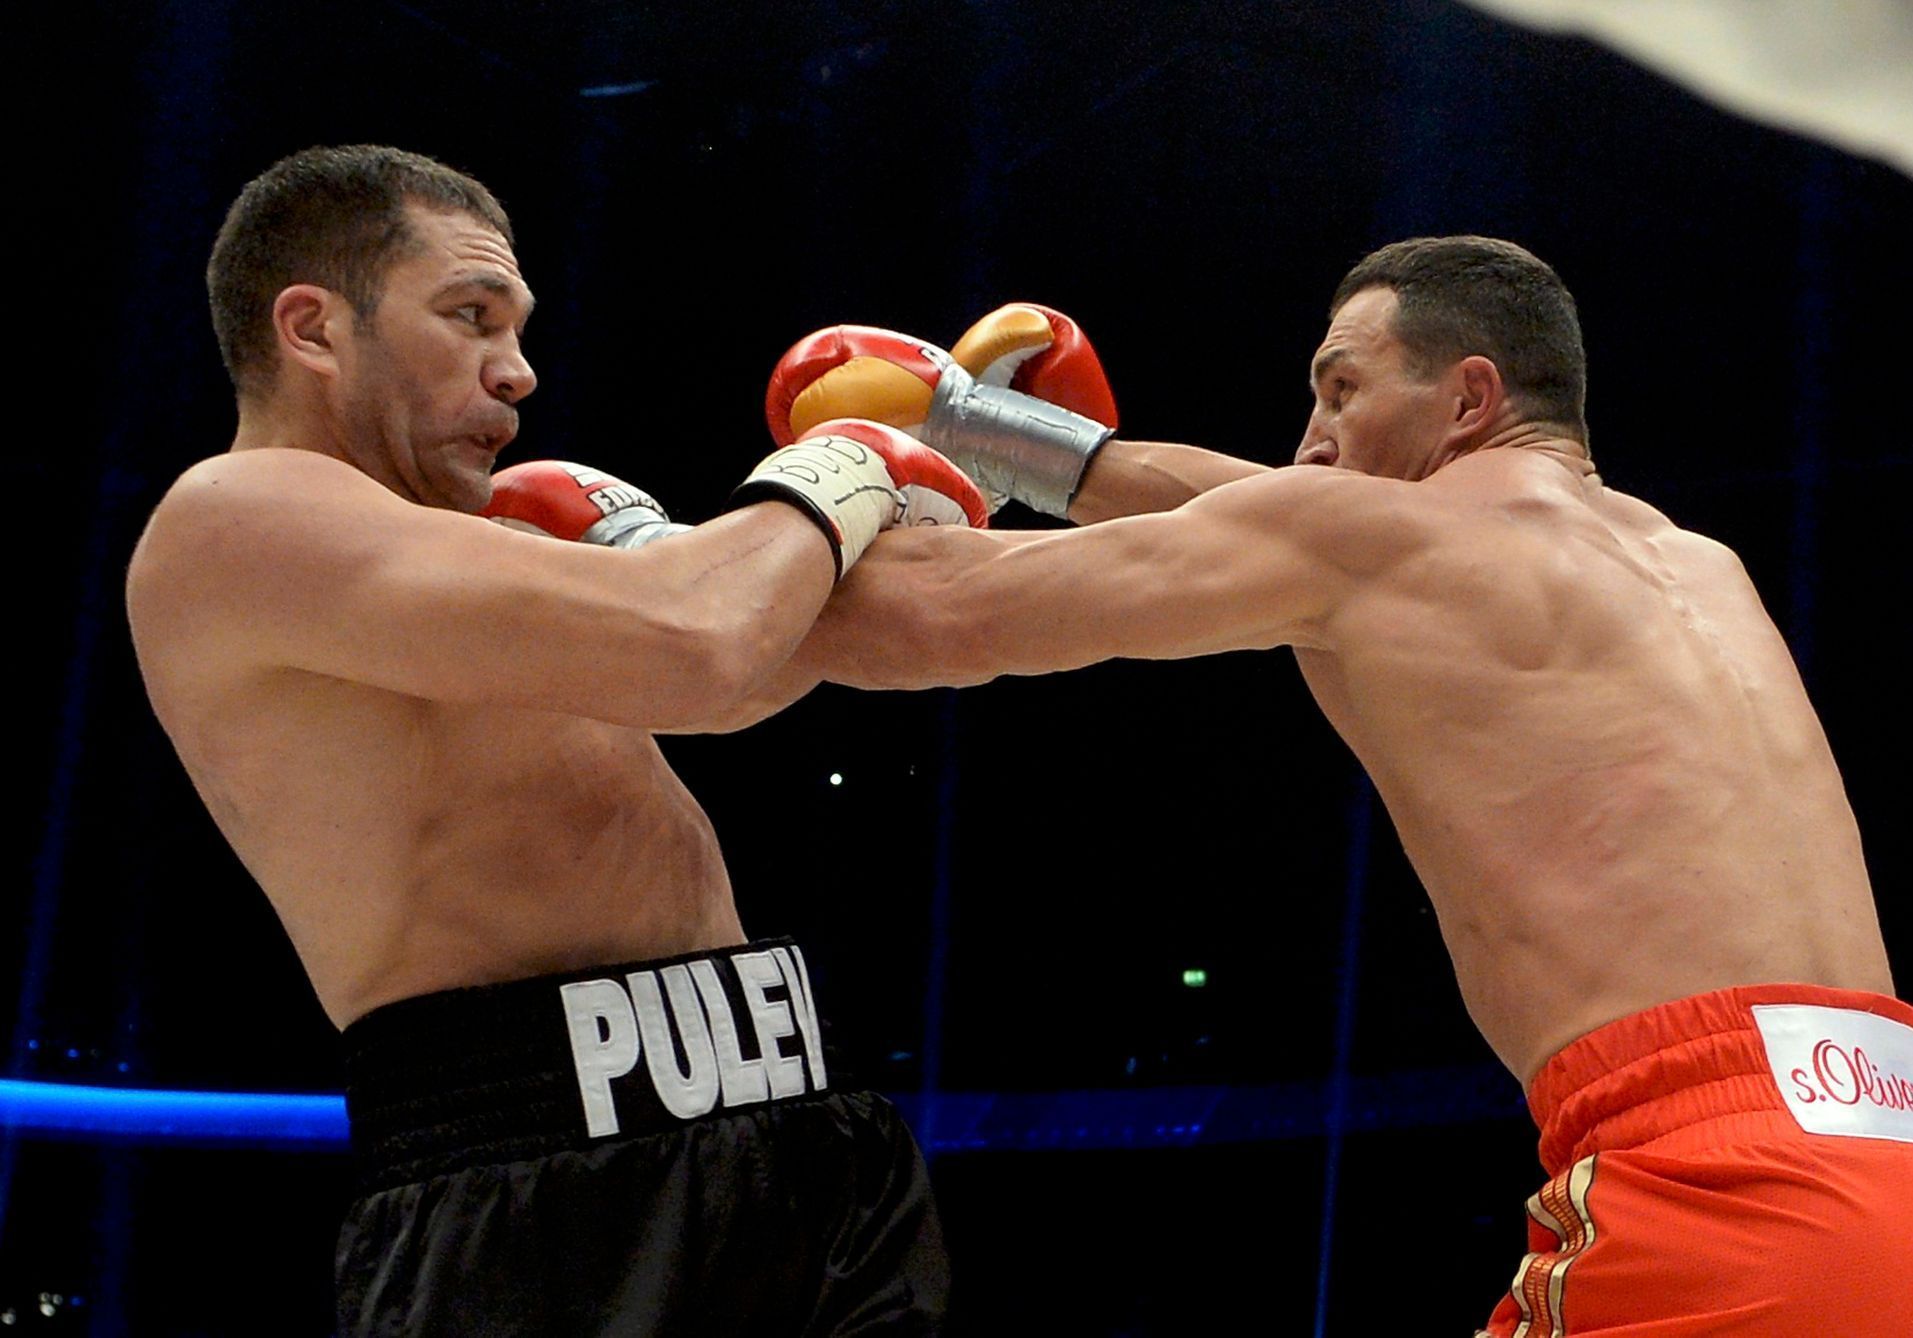 Ukrainian heavyweight boxing world champion Klitschko delivers a punch to his challenger Bulgarian Pulev during their title fight in Hamburg